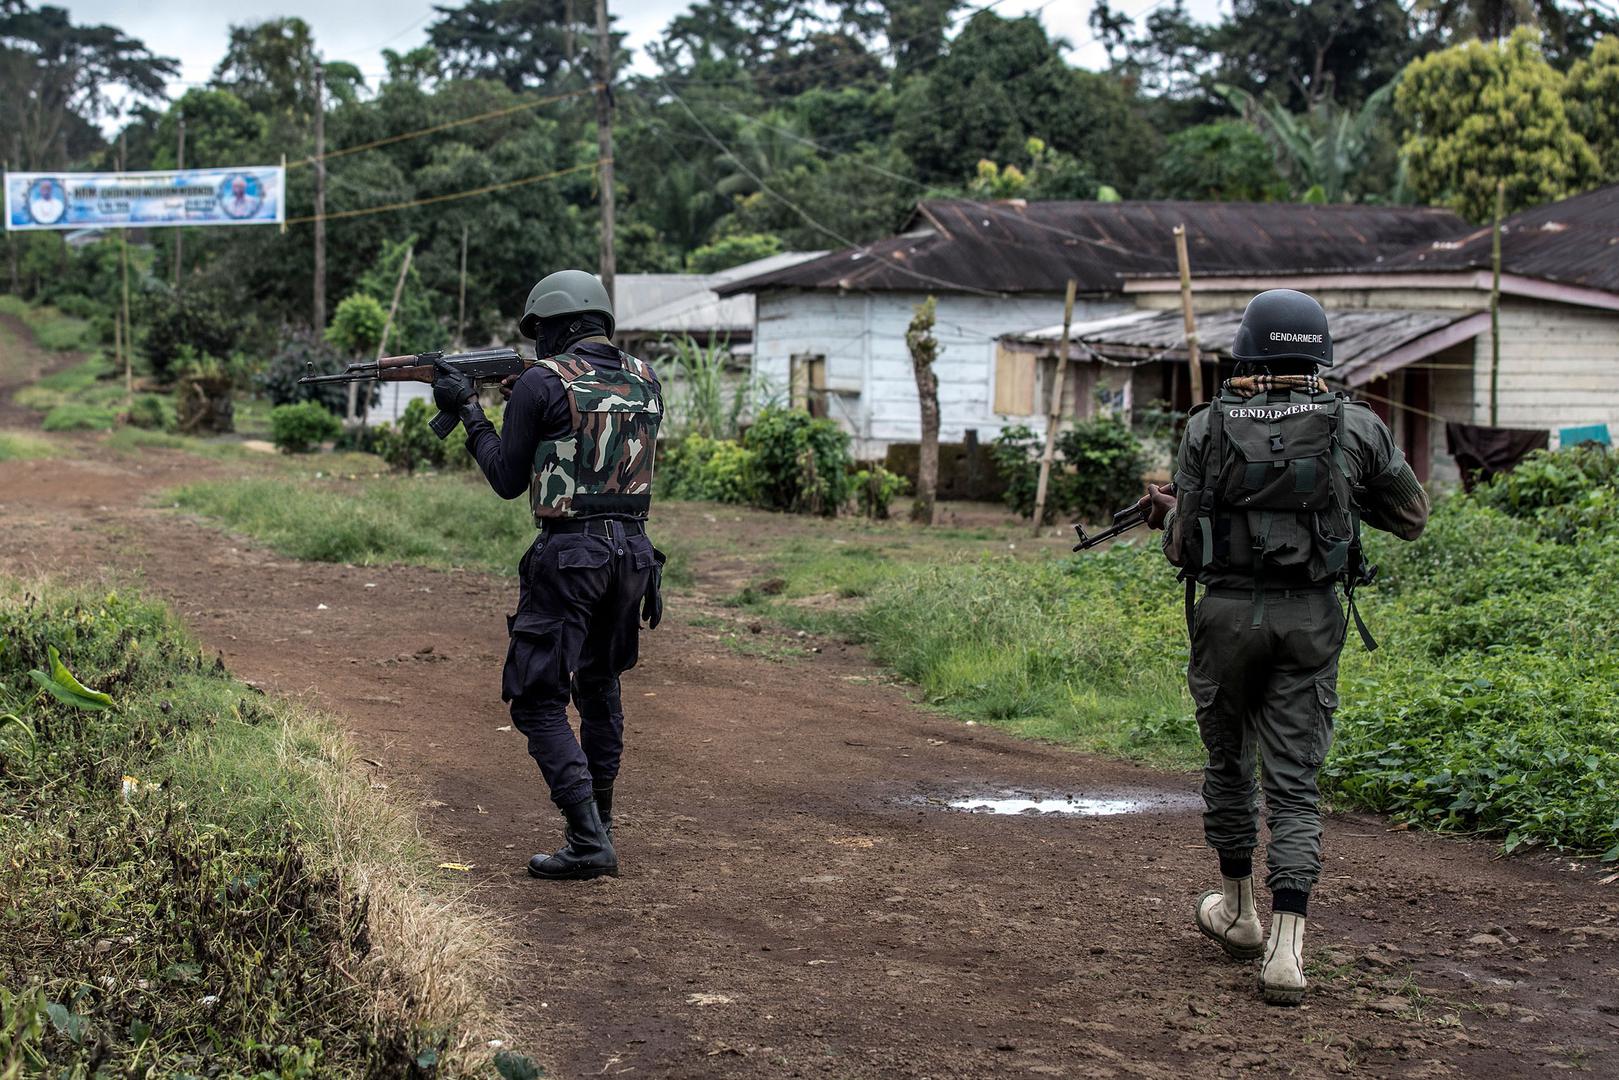 Security forces patrolling Muyuka, a town in the South West Region of Cameroon, as they try to rid the area of separatist fighters